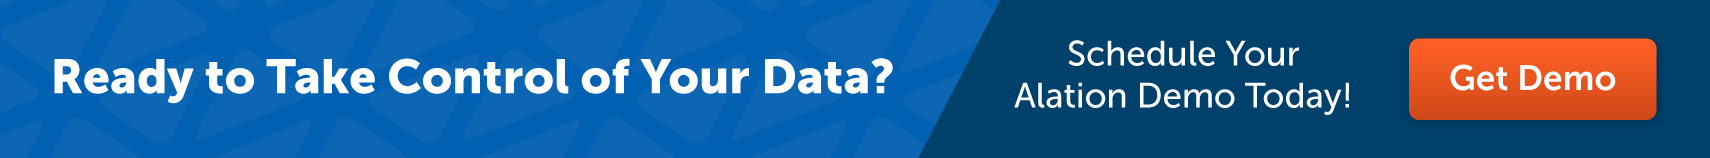 Ready to take control of your data CTA banner